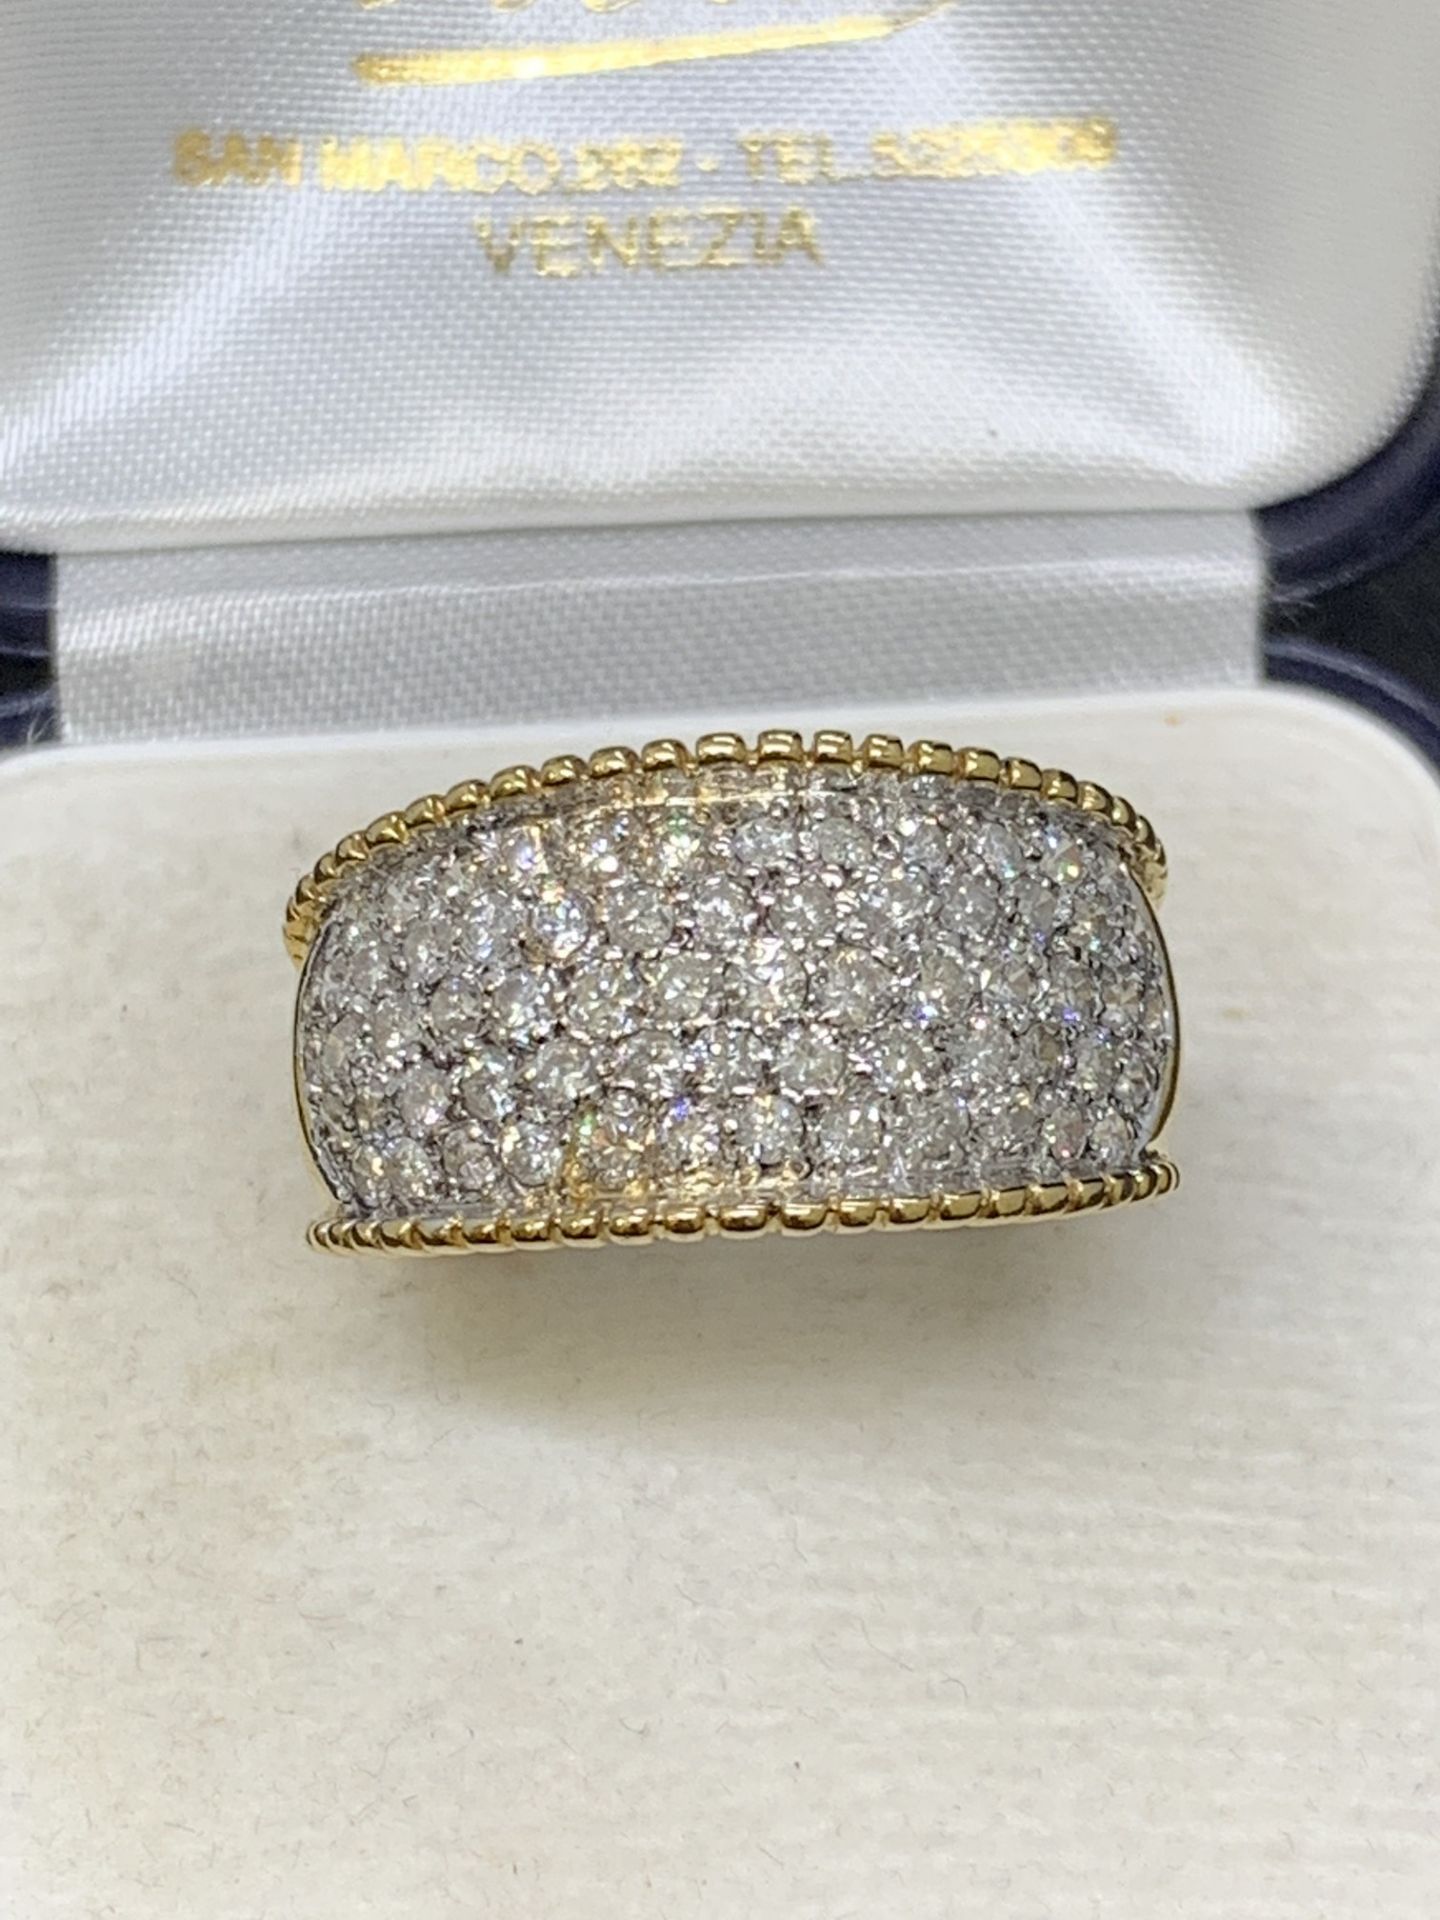 14 carat gold ring set with approximately 1.8 carats of diamonds Approximately 6.7 g - Image 2 of 4